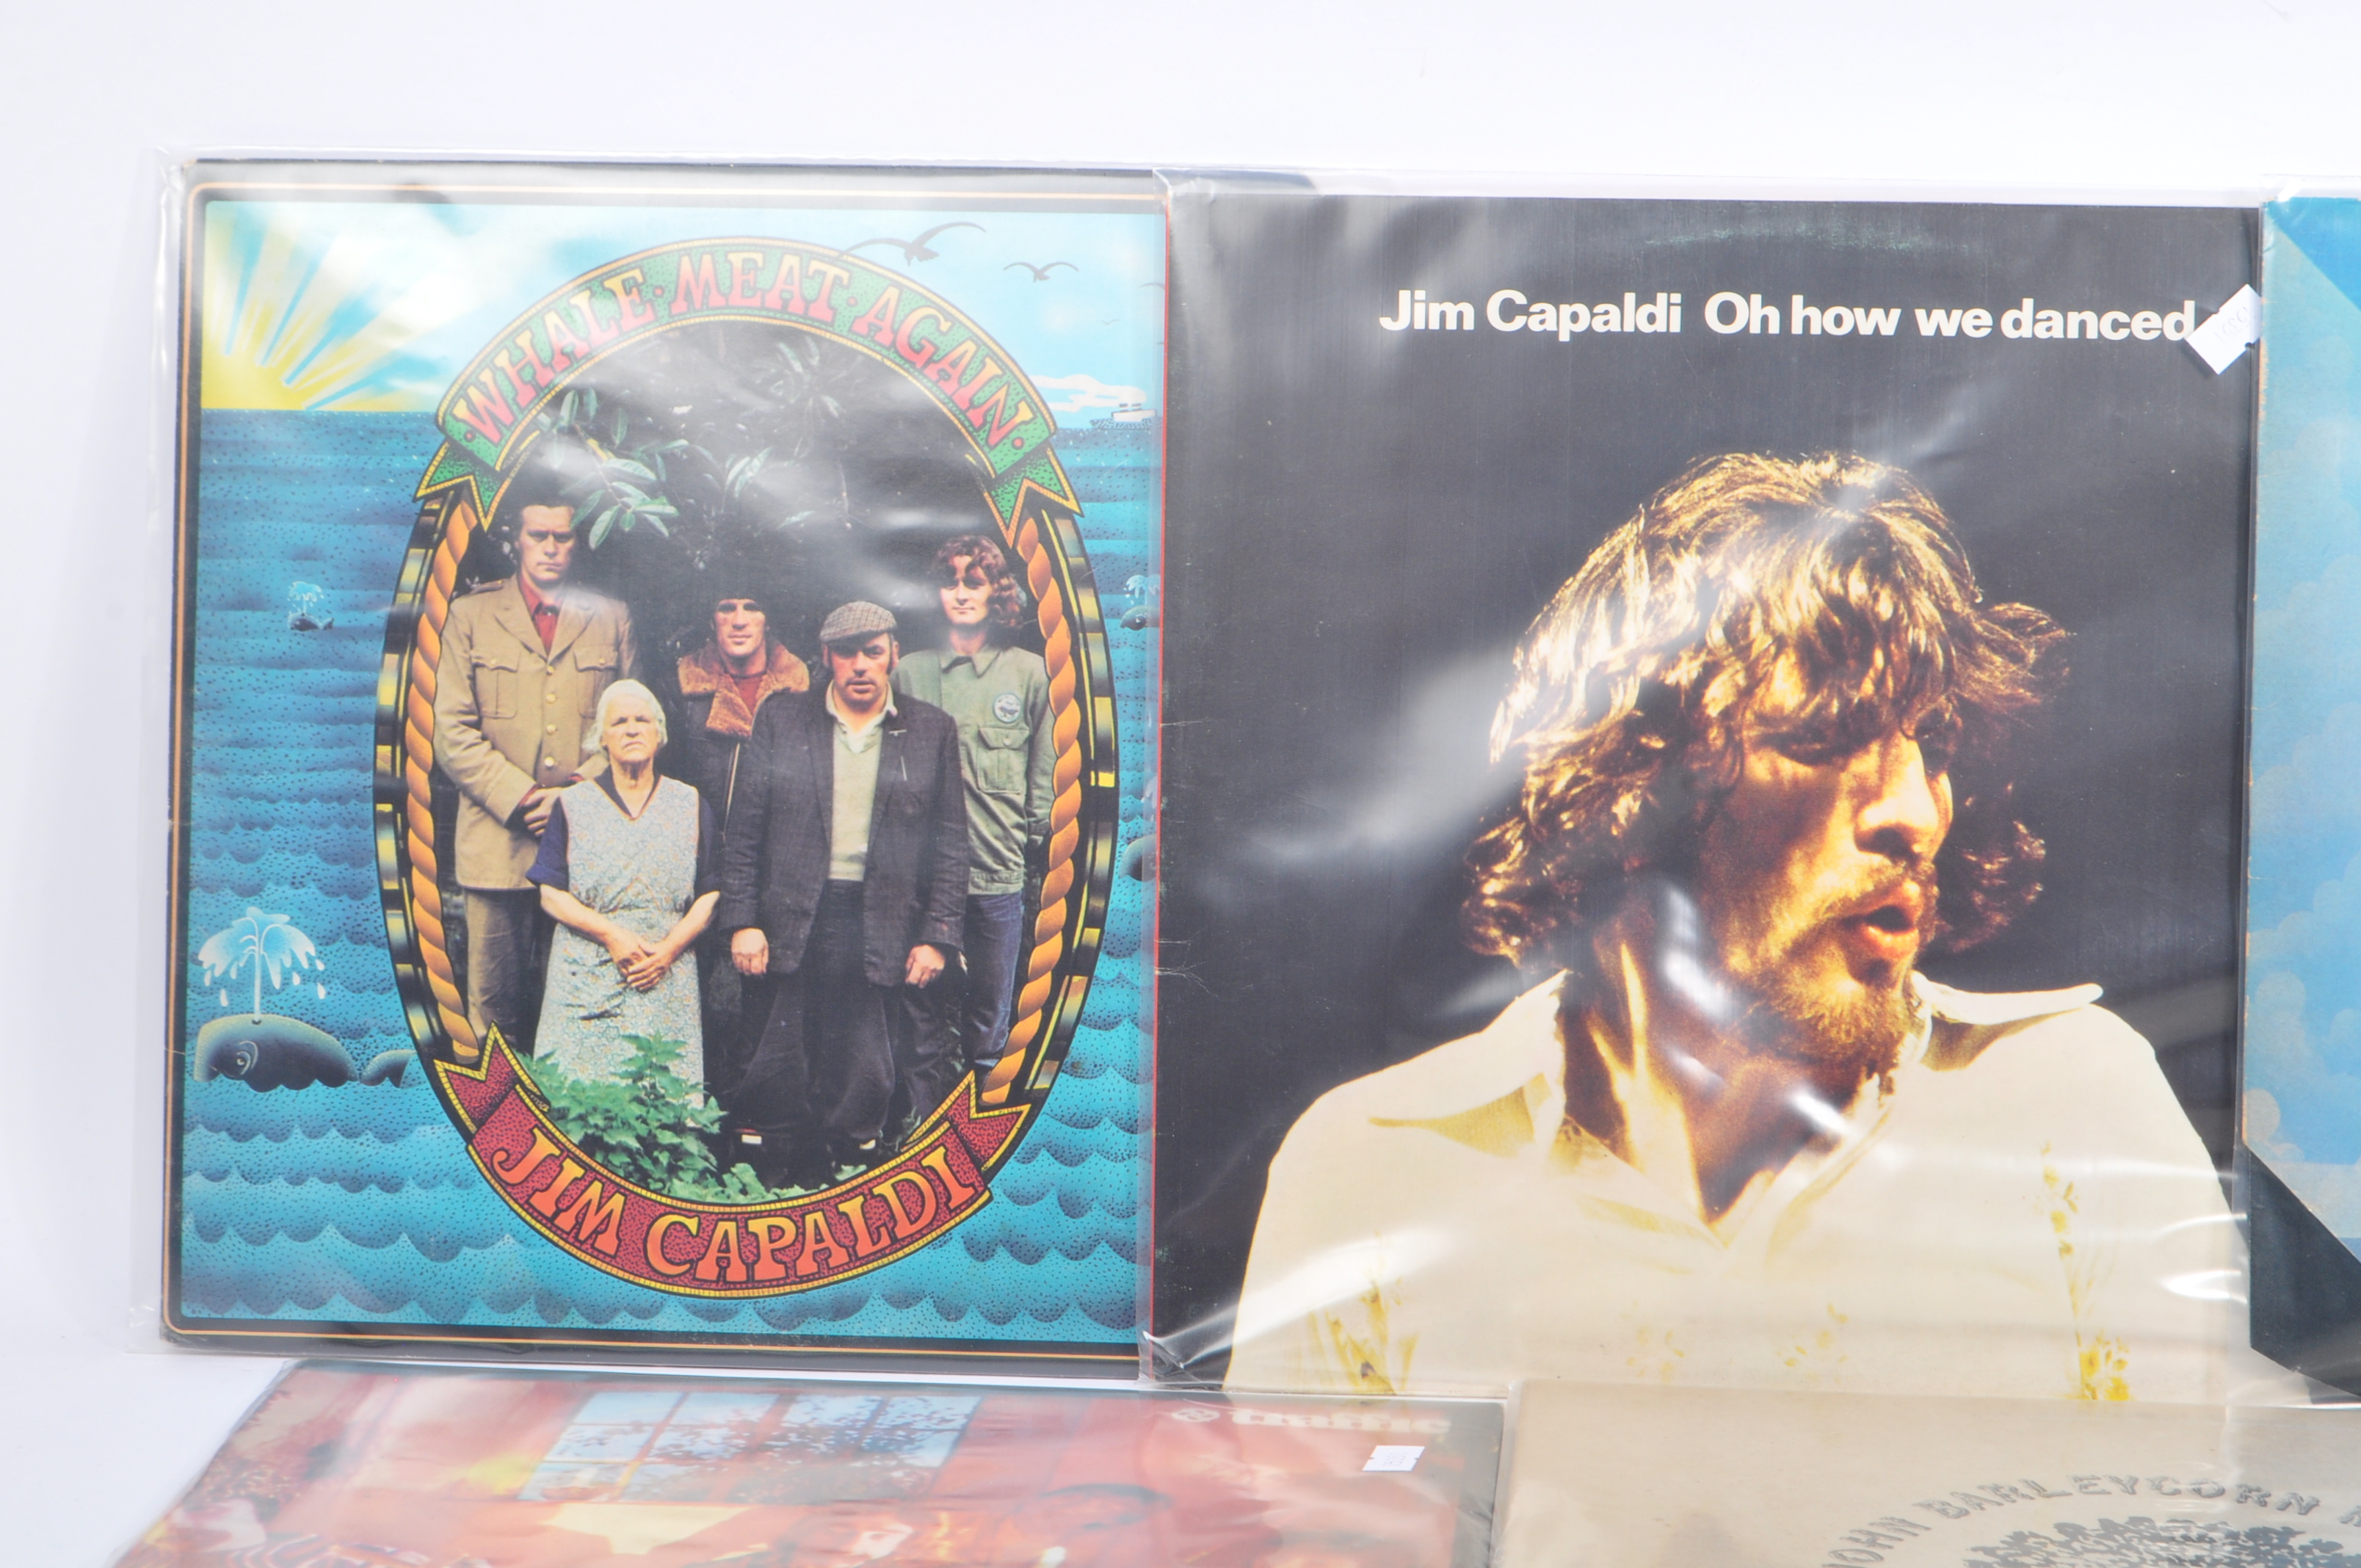 TRAFFIC / JIM CAPALDI - COLLECTION OF VINYL LP RECORD ALBUMS - Image 2 of 5